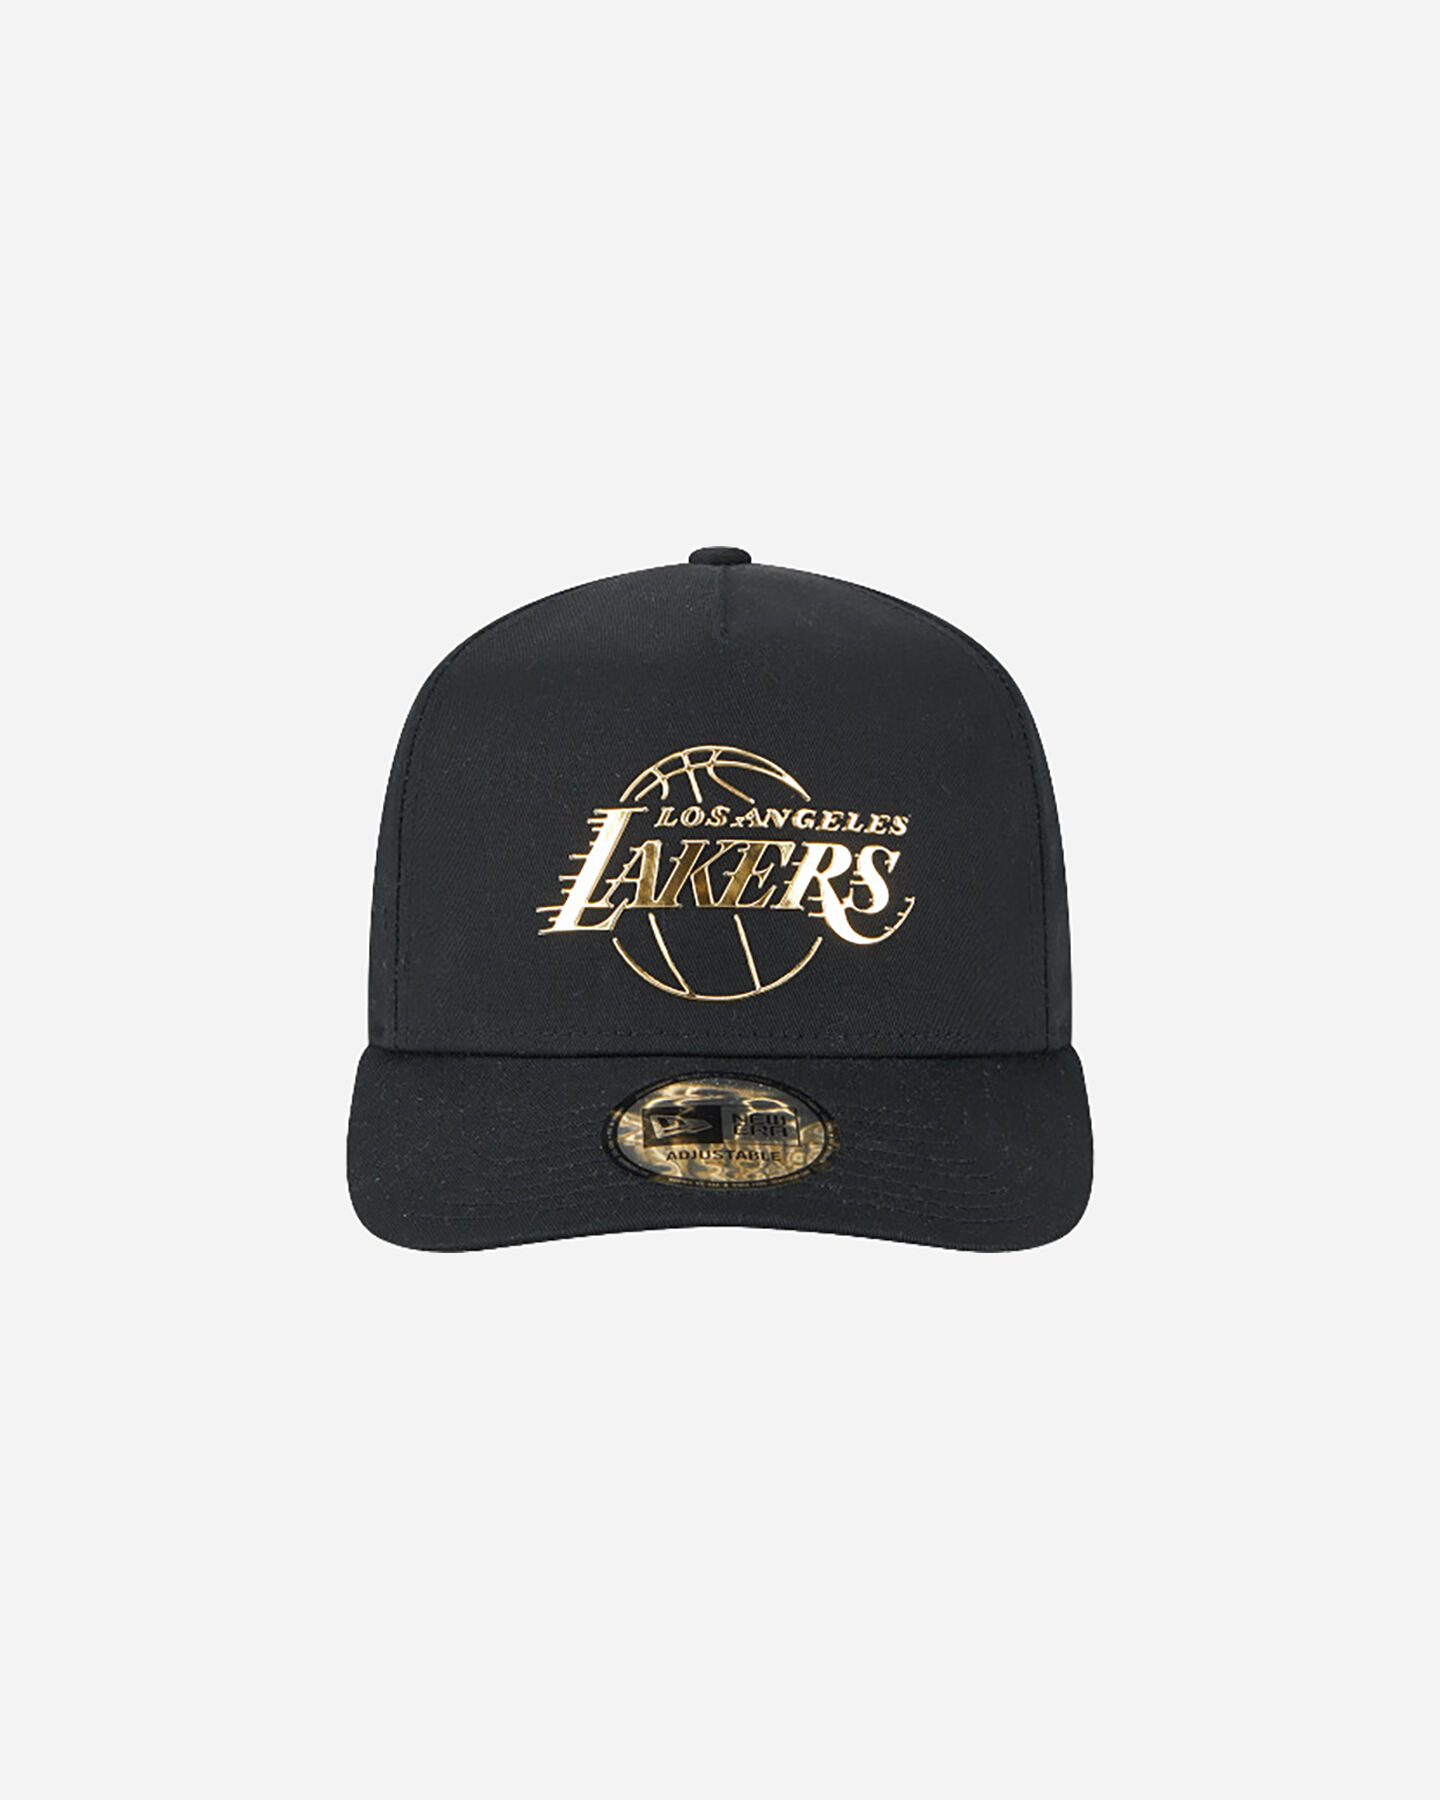  Cappellino NEW ERA 9FORTY EFRAME FOIL LOS ANGELES LAKERS  S5630878|001|OSFM scatto 1